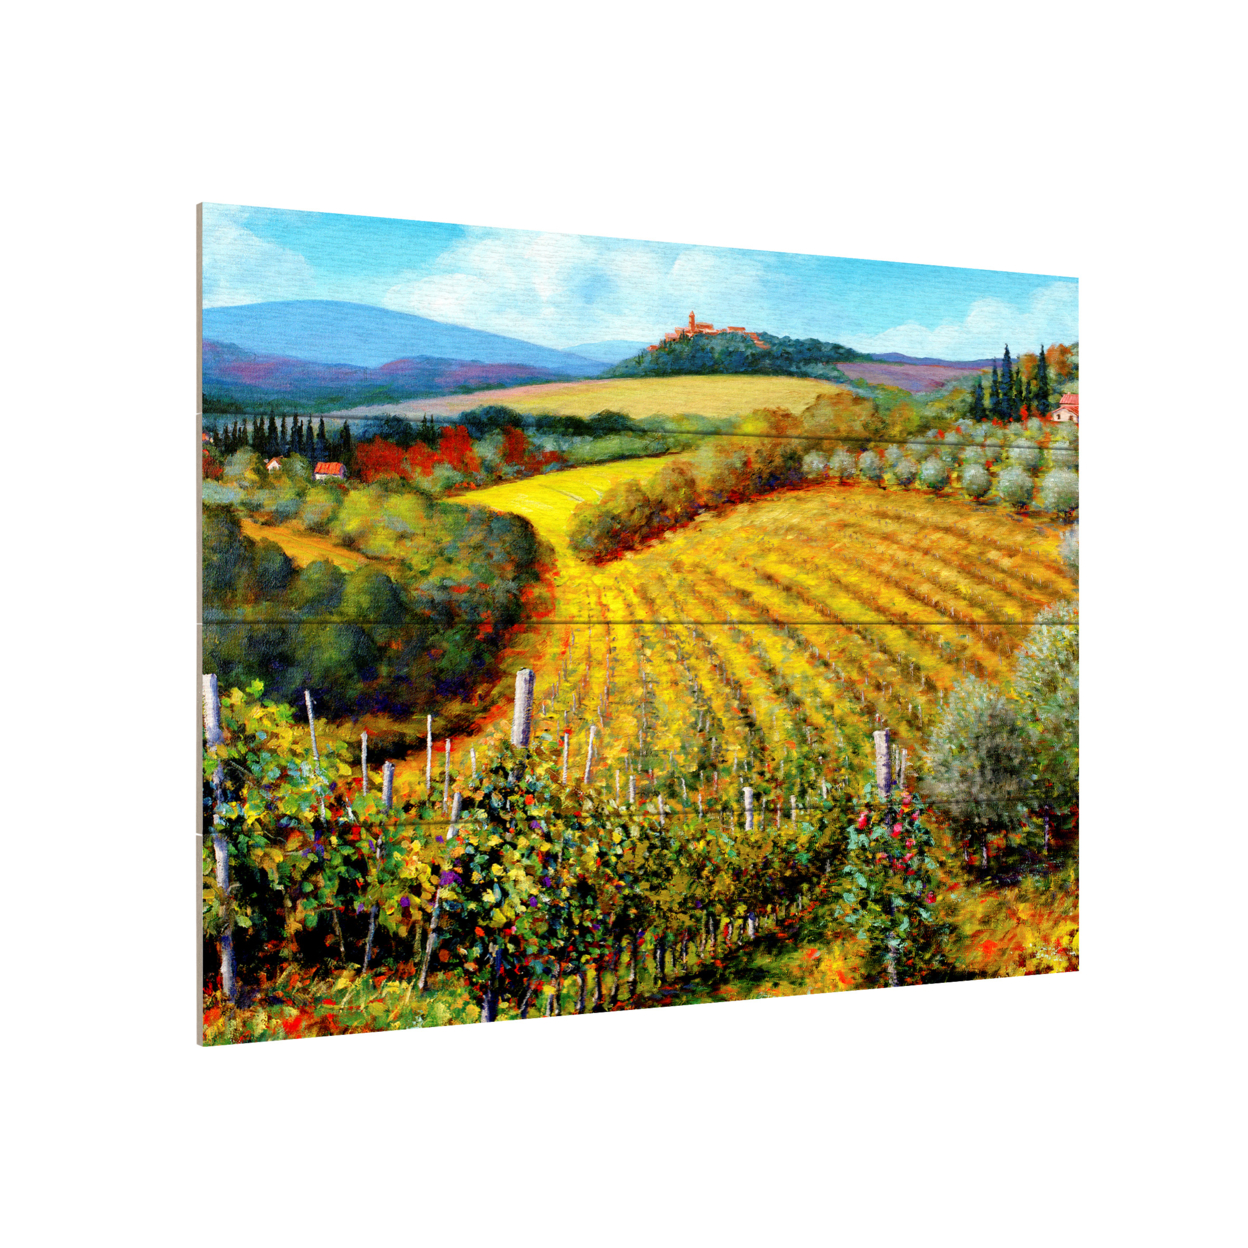 Wall Art 12 X 16 Inches Titled Chianti Vineyards Ready To Hang Printed On Wooden Planks